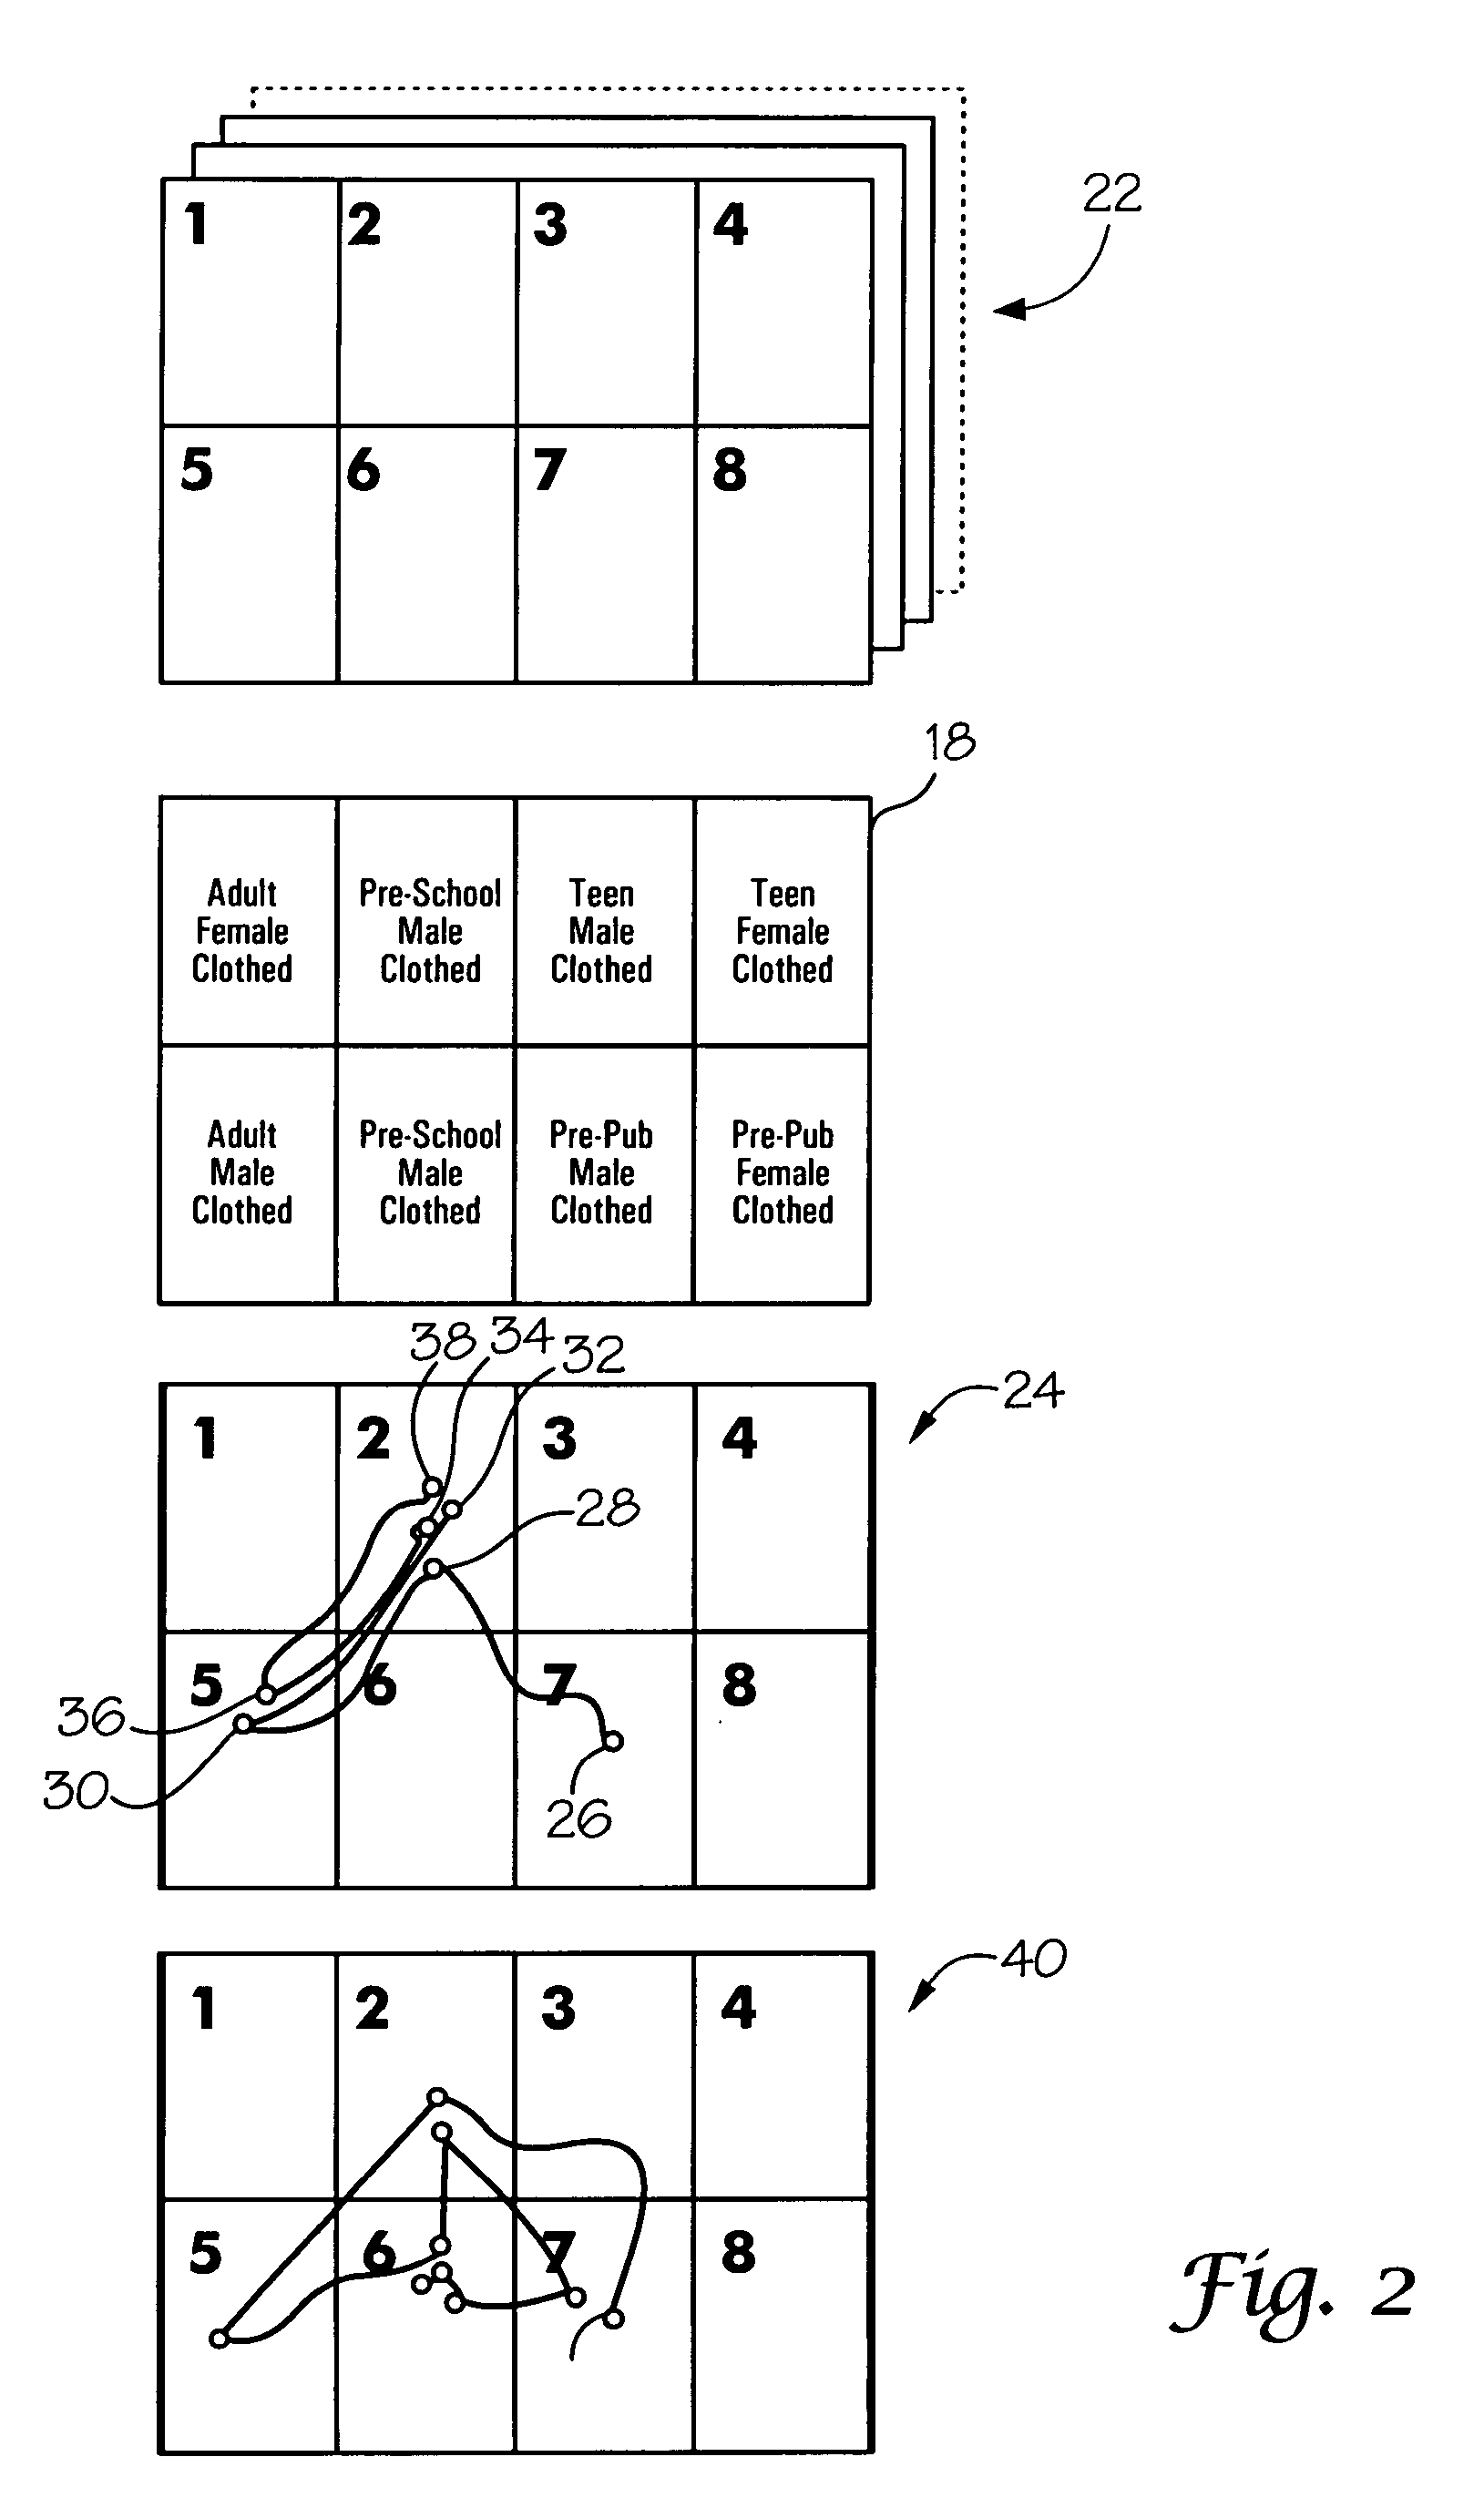 System and method for performing physiological assessments